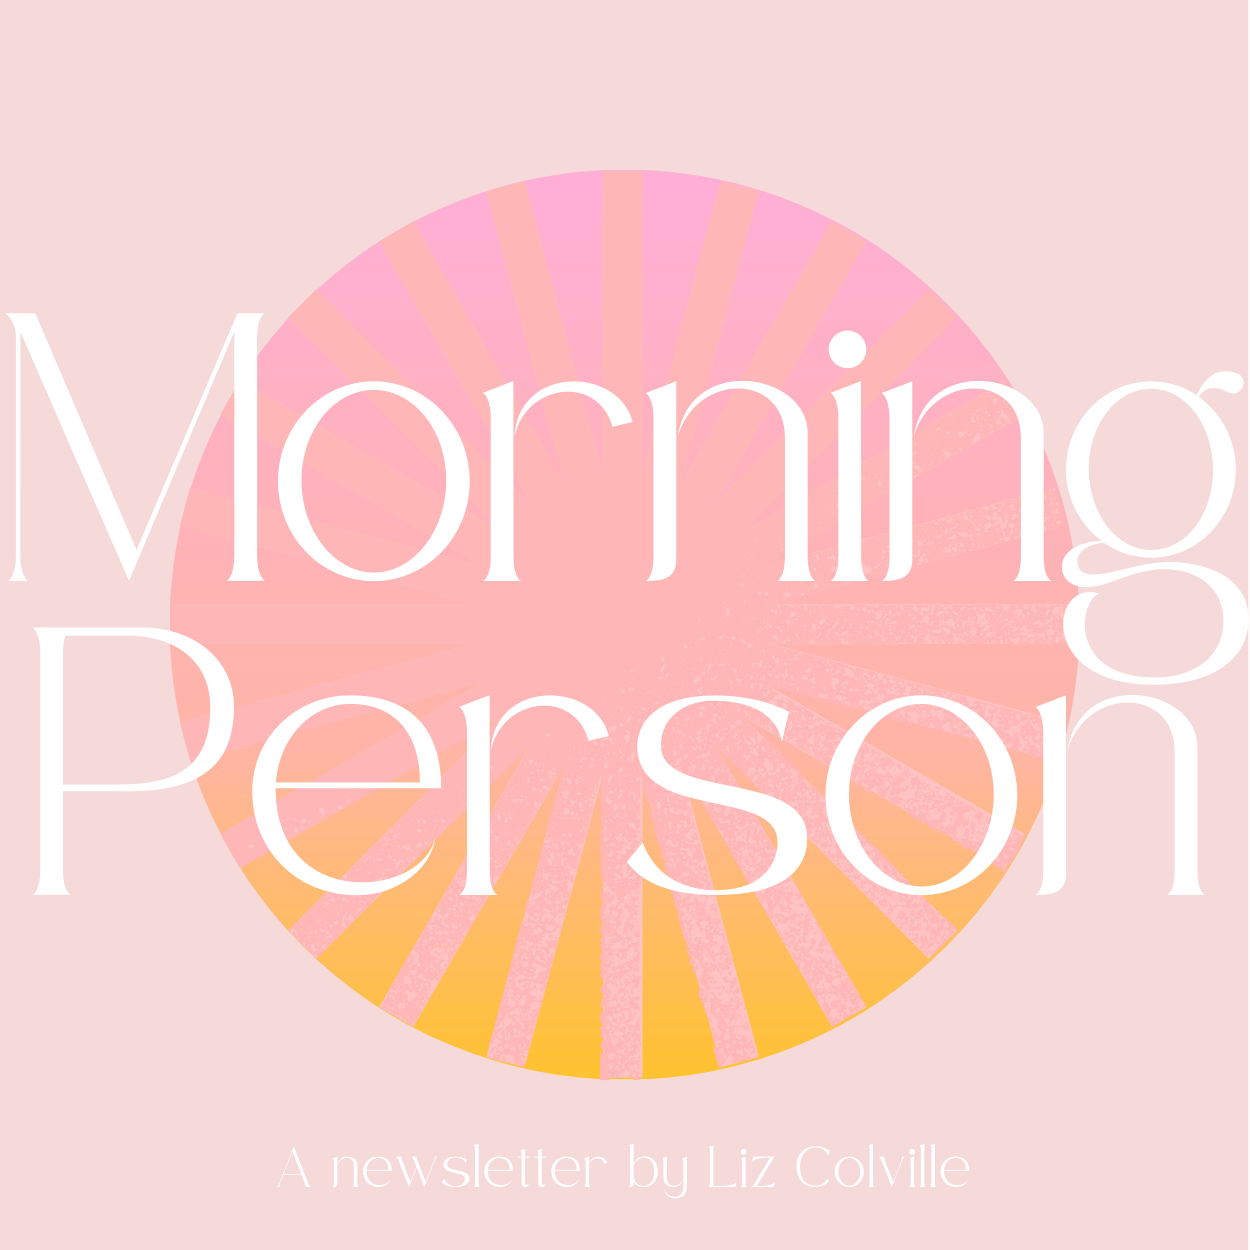 Morning Person